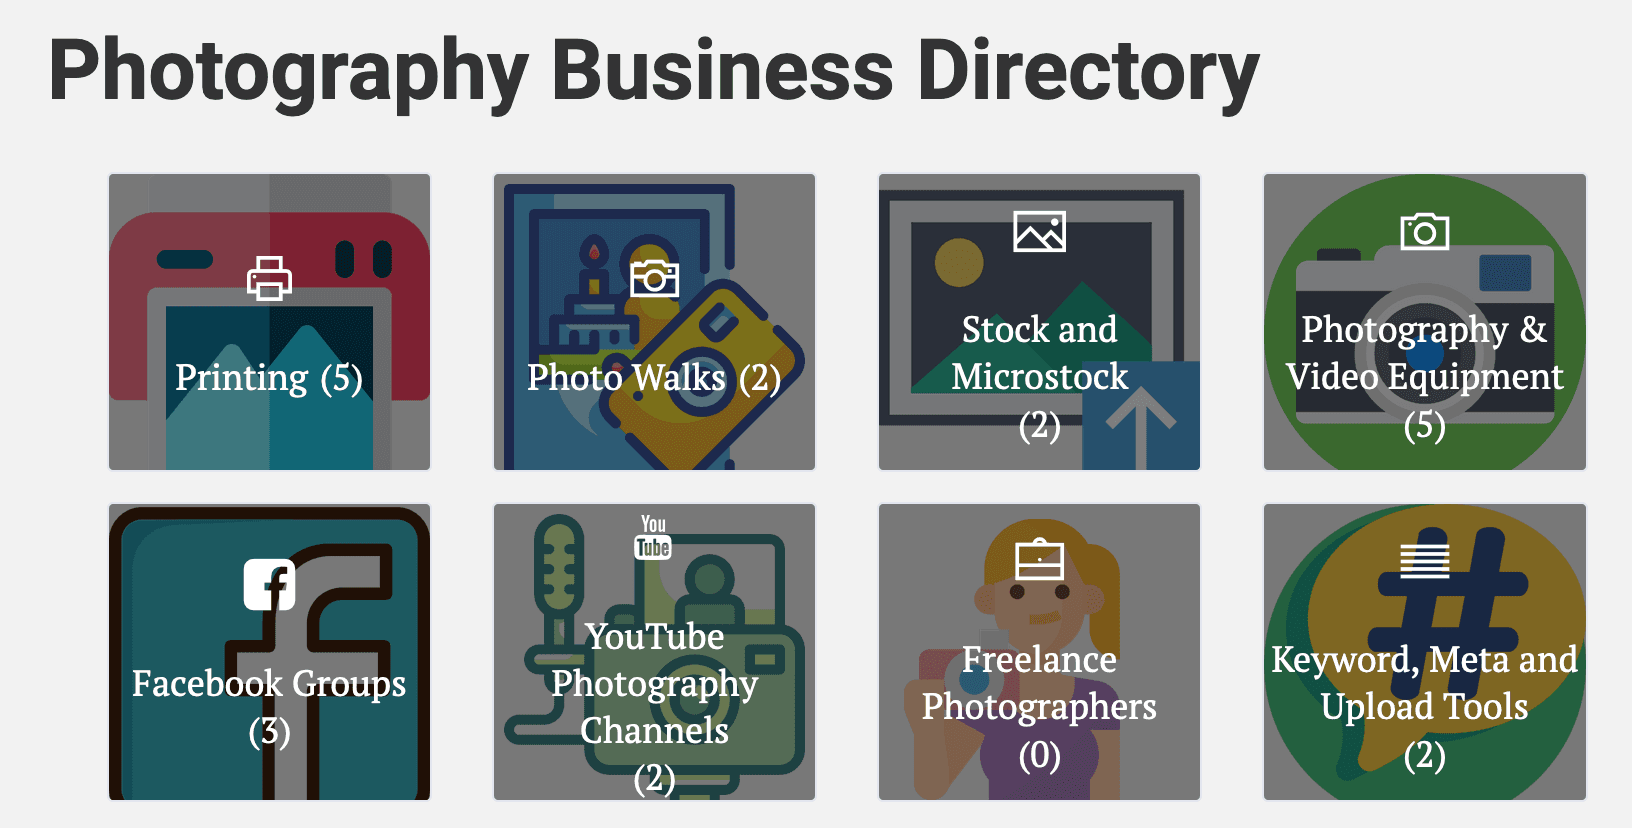 Photography Business Directory - Launched 1